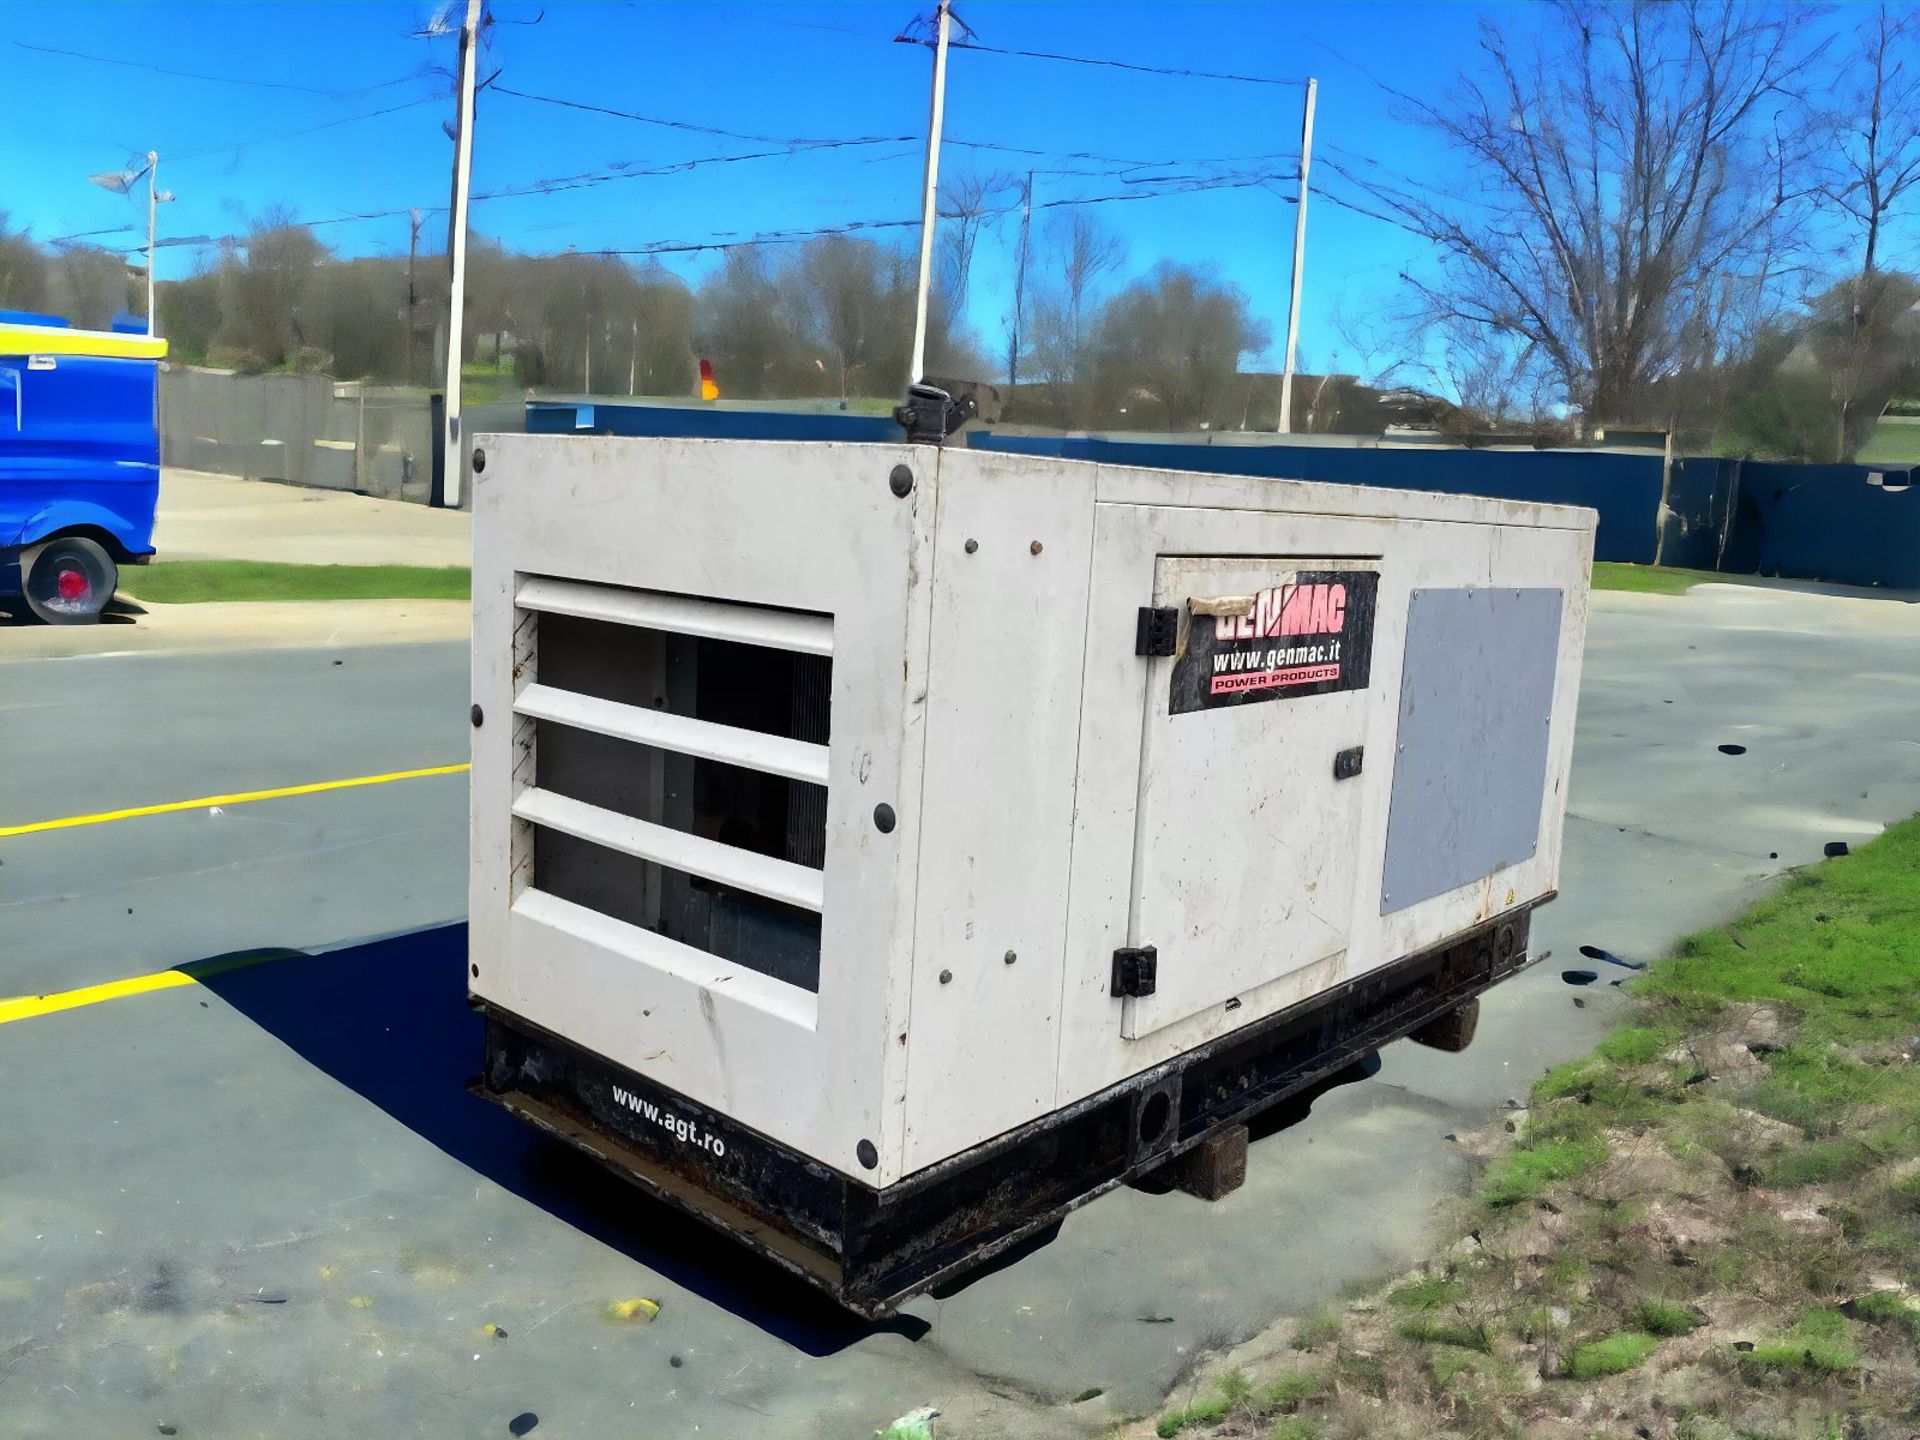 POWER UP YOUR PROJECTS WITH THE GENMAC 80 KVA SILENT GENERATOR